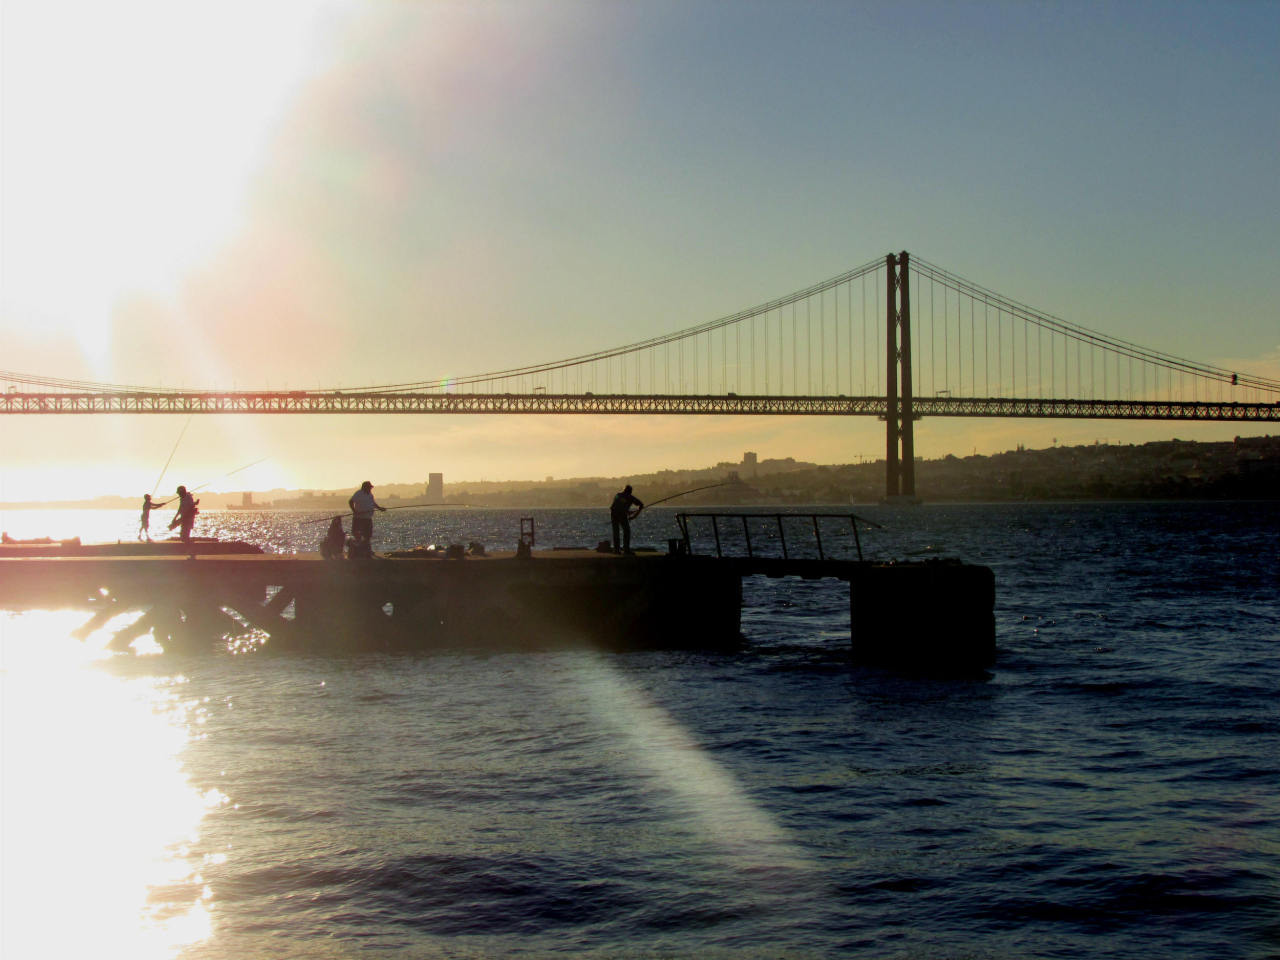 Lisbon/Almada. A walk along Cais do Ginjal.
“ Walking along Cais do Ginjal during sunset is probably one of the most beautiful things…
”
View Post